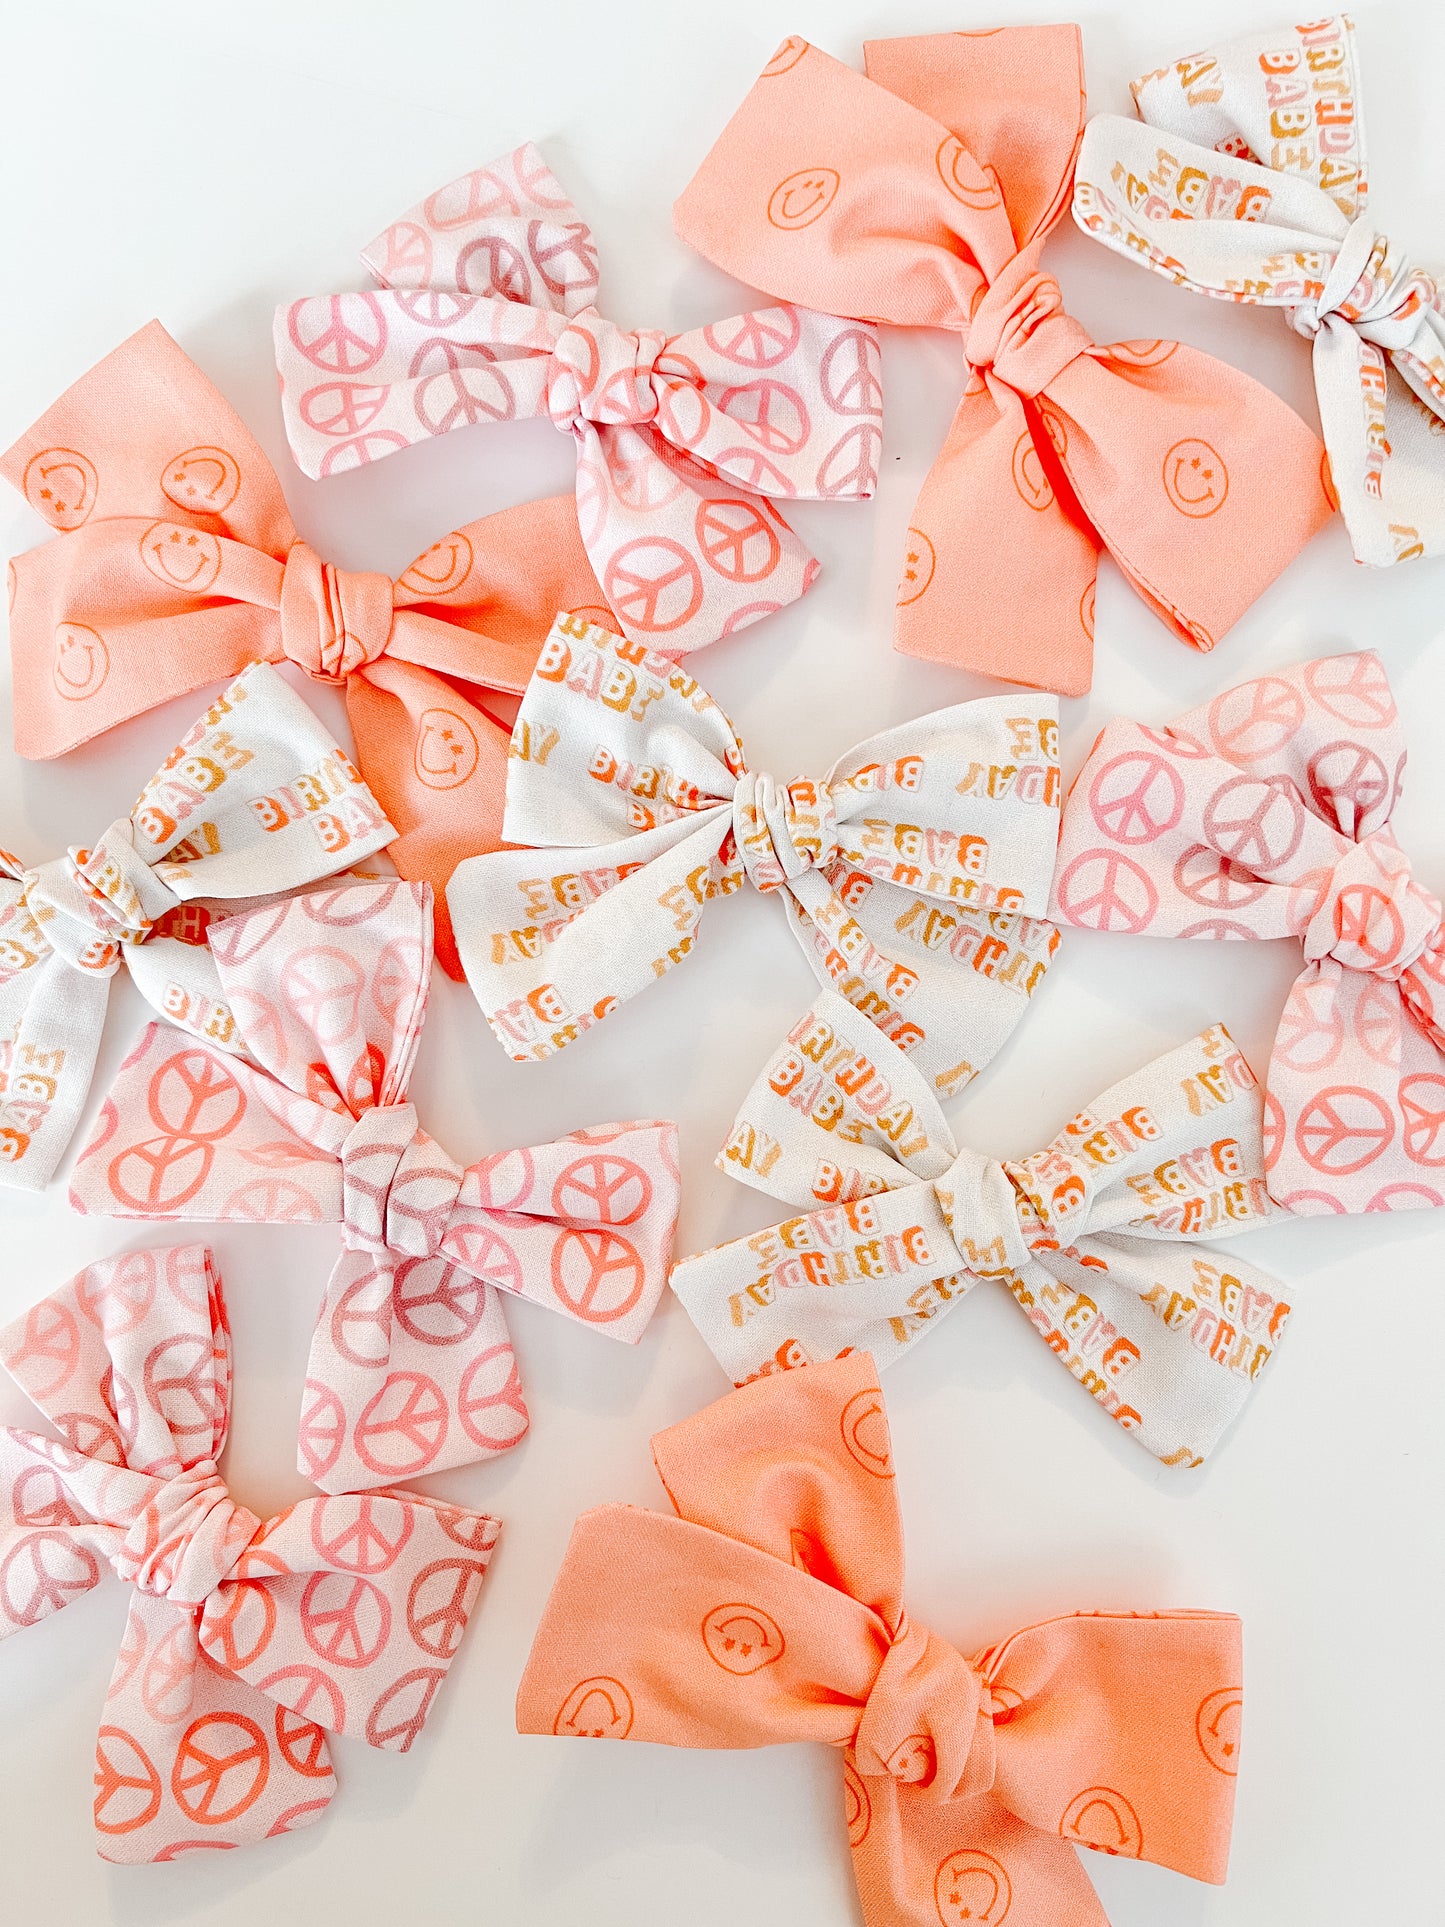 Peach Smiley - Large sized cotton Hand tied Bow